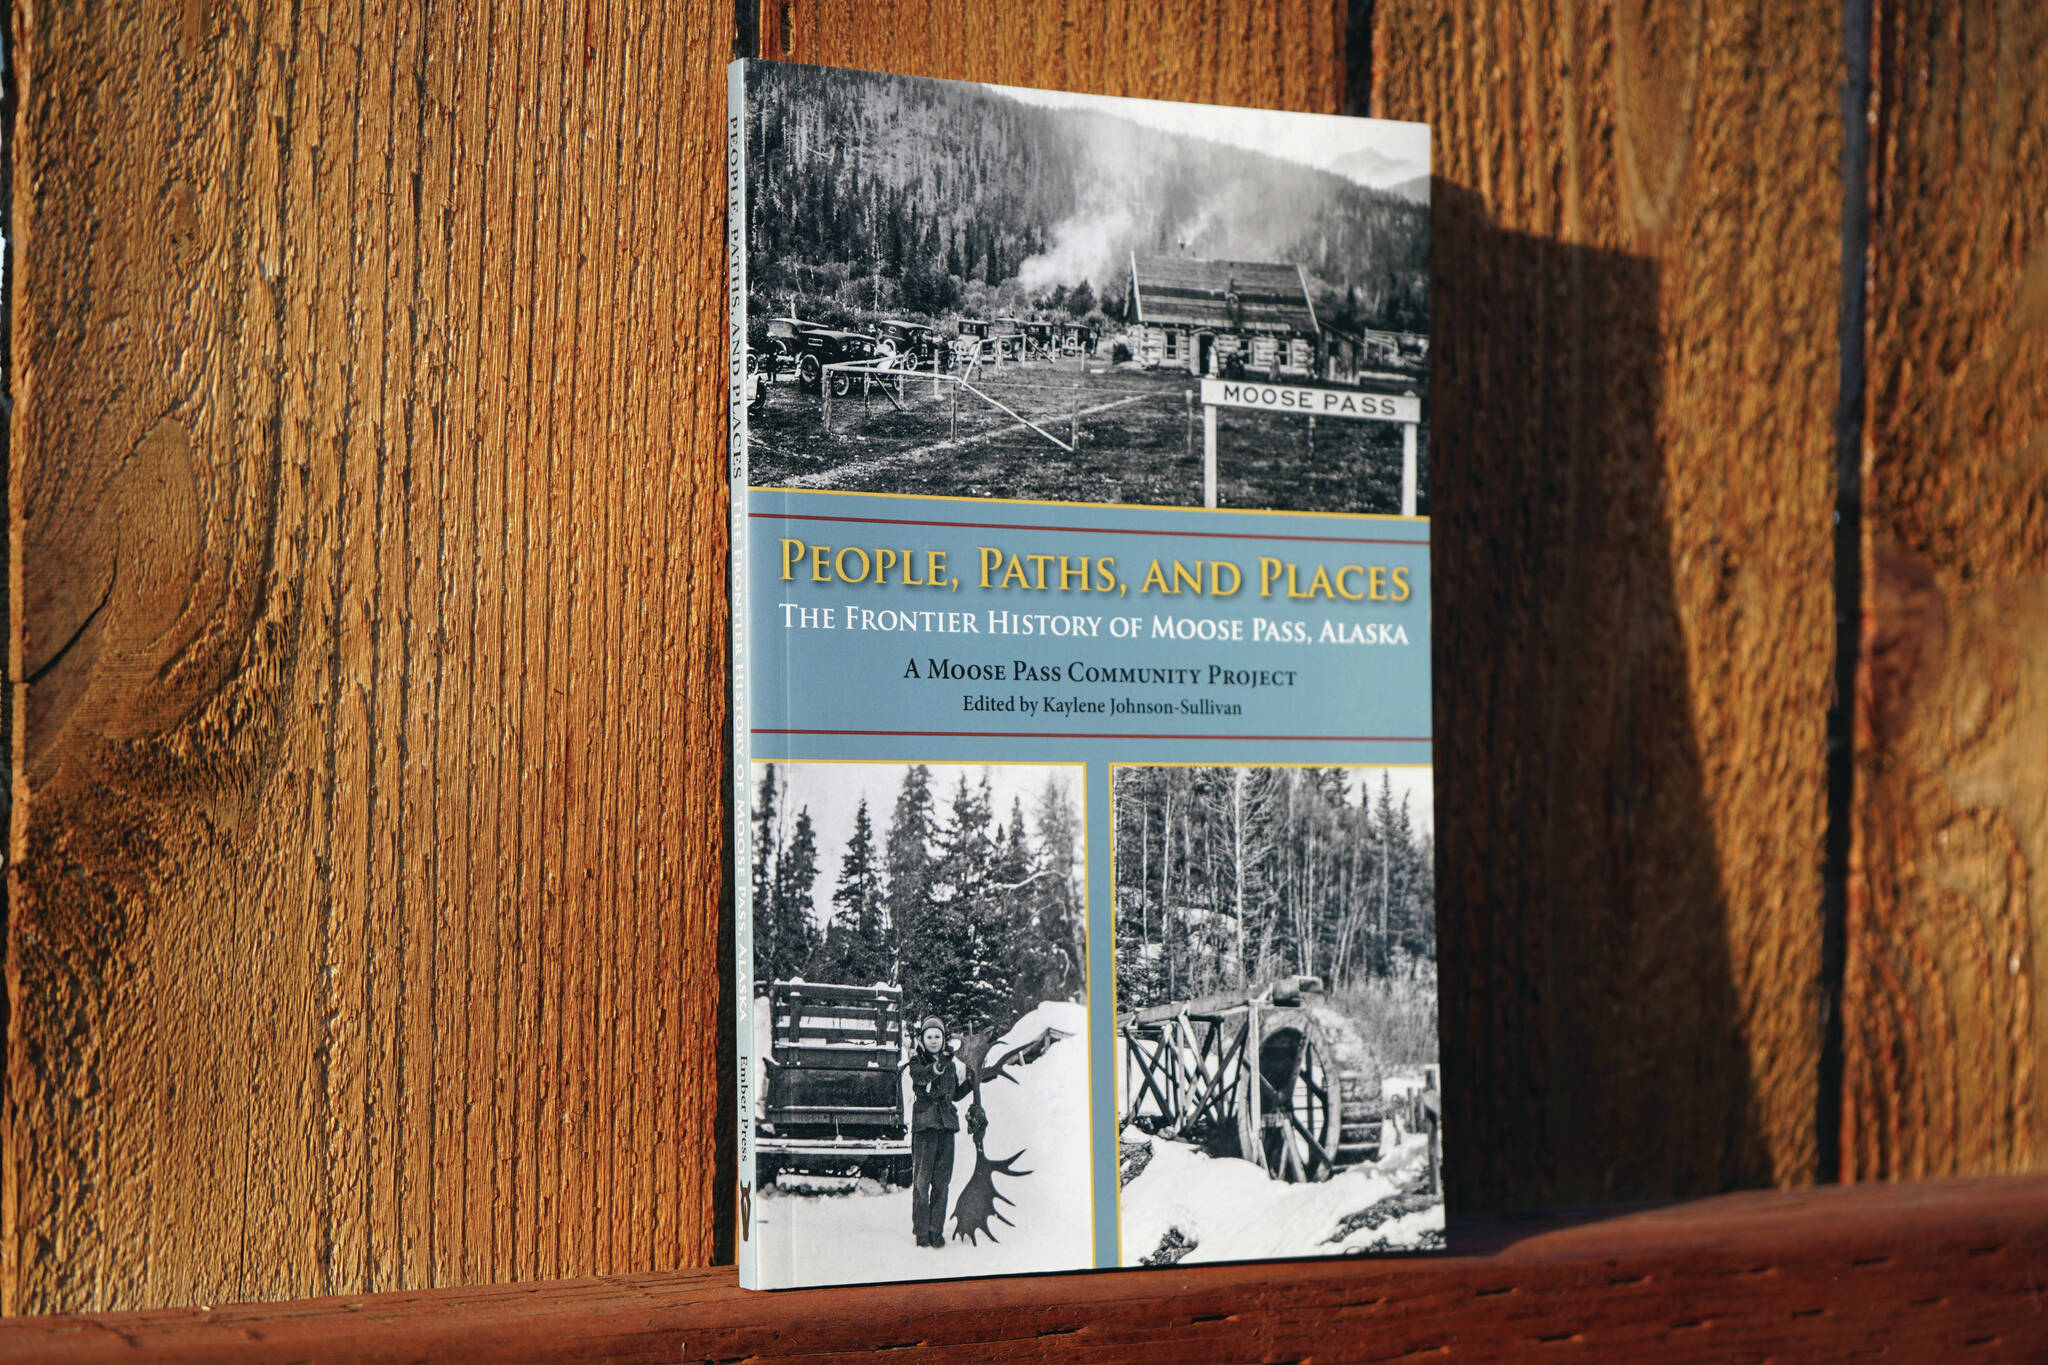 Jake Dye/Peninsula Clarion
A copy of “People, Paths, and Places: The Frontier History of Moose Pass, Alaska” stands in sunlight in Soldotna on Friday.